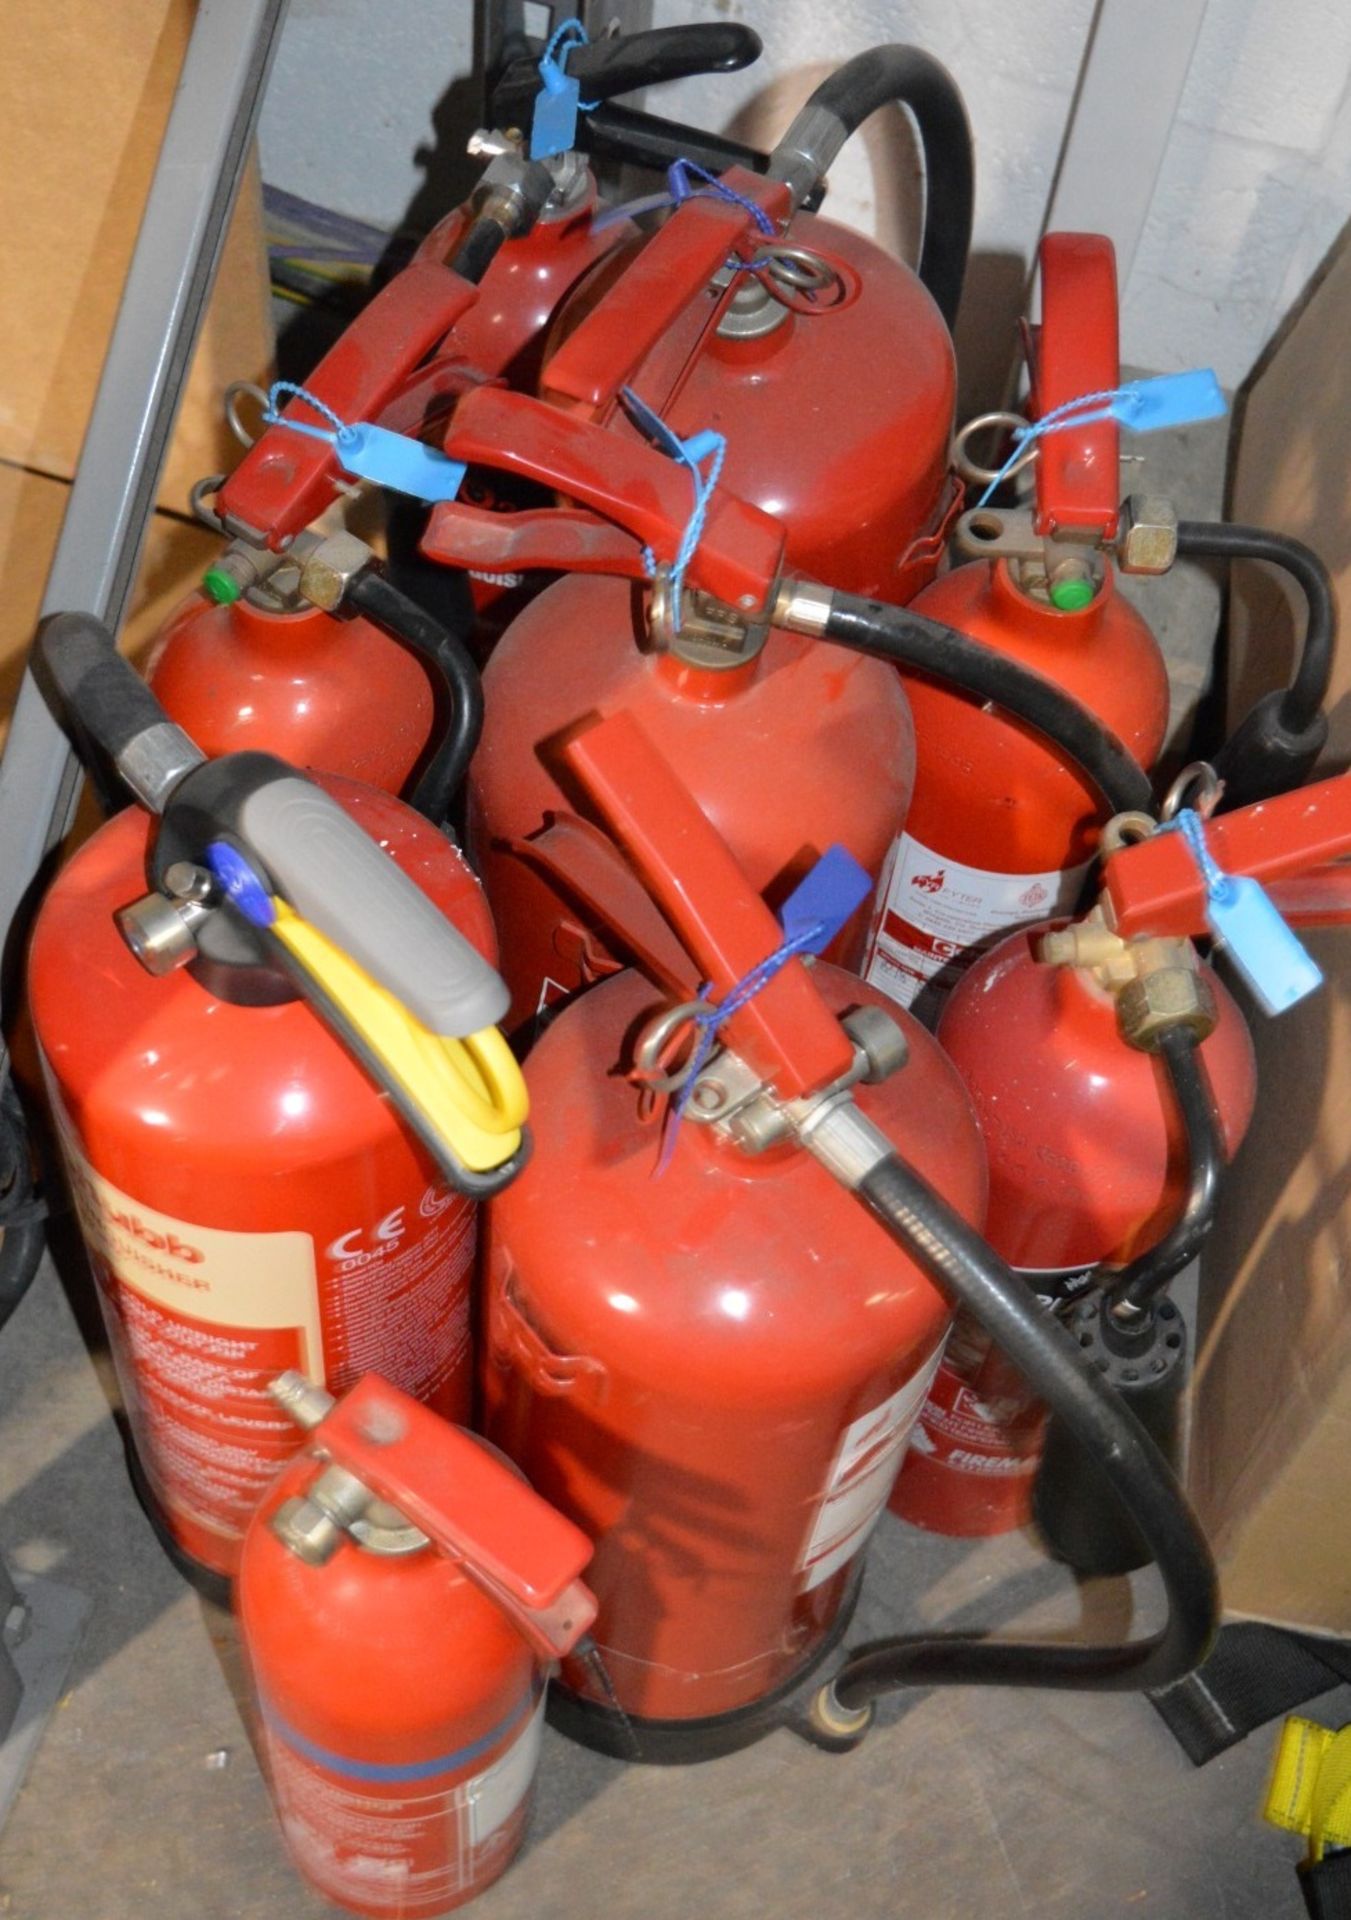 9 x Various Fire Extinguishers Including Chubb 6gk Foam Extinguishers and More - Seals Intact - - Image 2 of 5